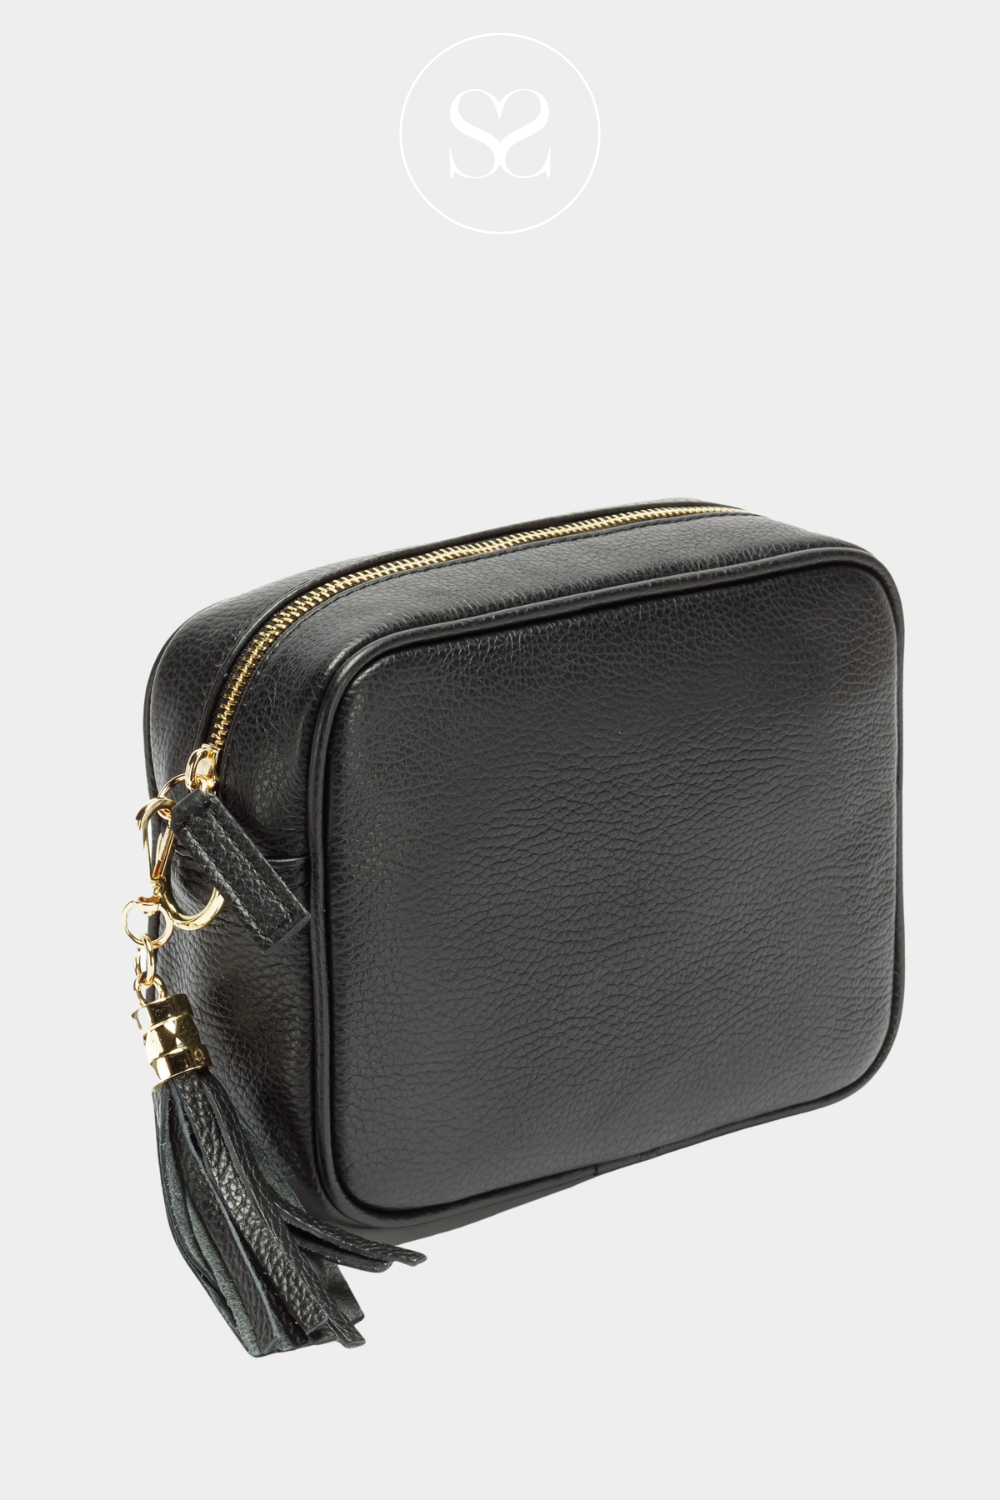 ELIE BEAUMONT BLACK CROSSBODY LEATHER BAGS WITH GOLD HARDWARE